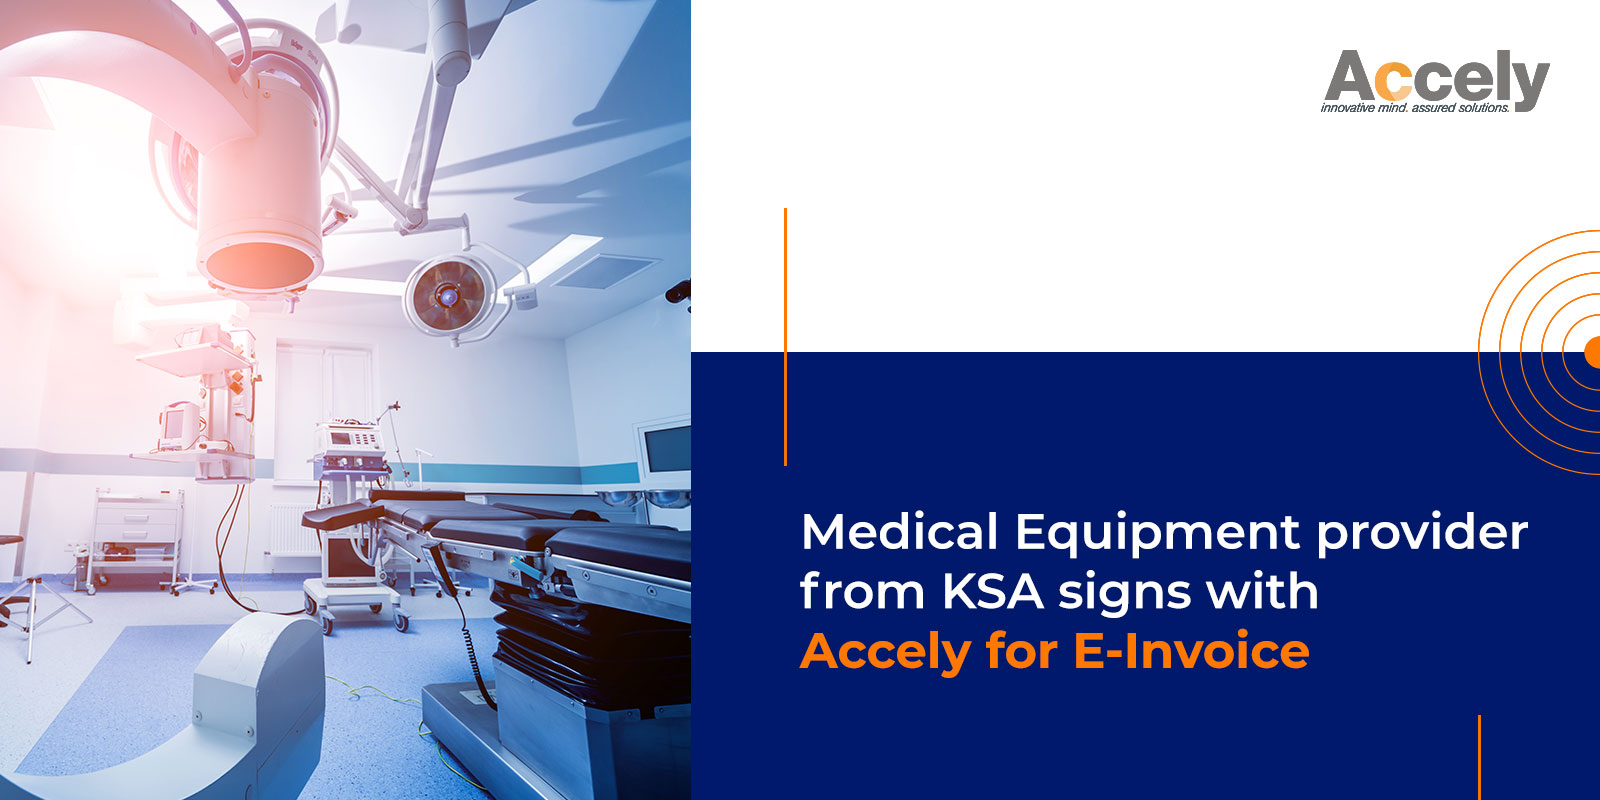 Leading Medical Equipment provider from KSA signs with Accely for E-Invoice